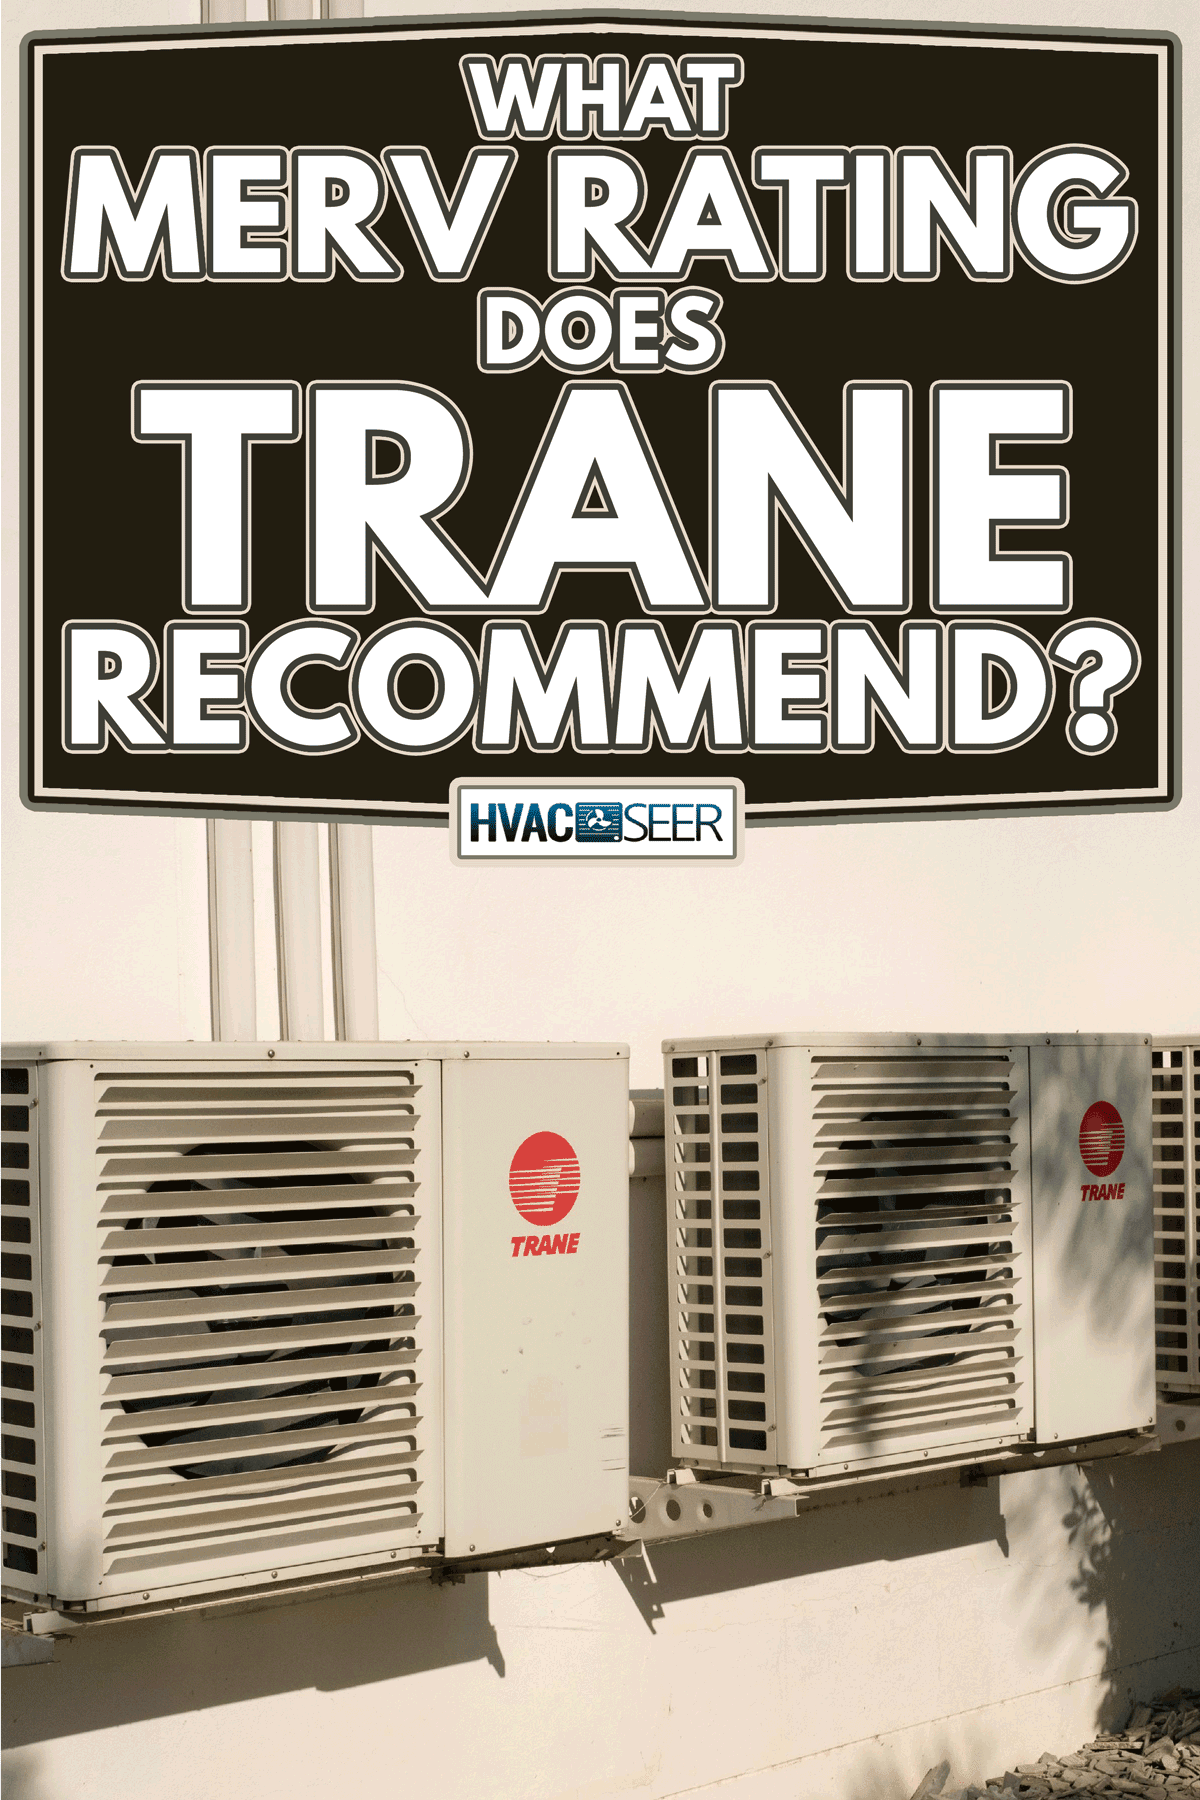 TRANE condensing units of air conditioner at a white painted wall, What MERV Rating Does Trane Recommend?